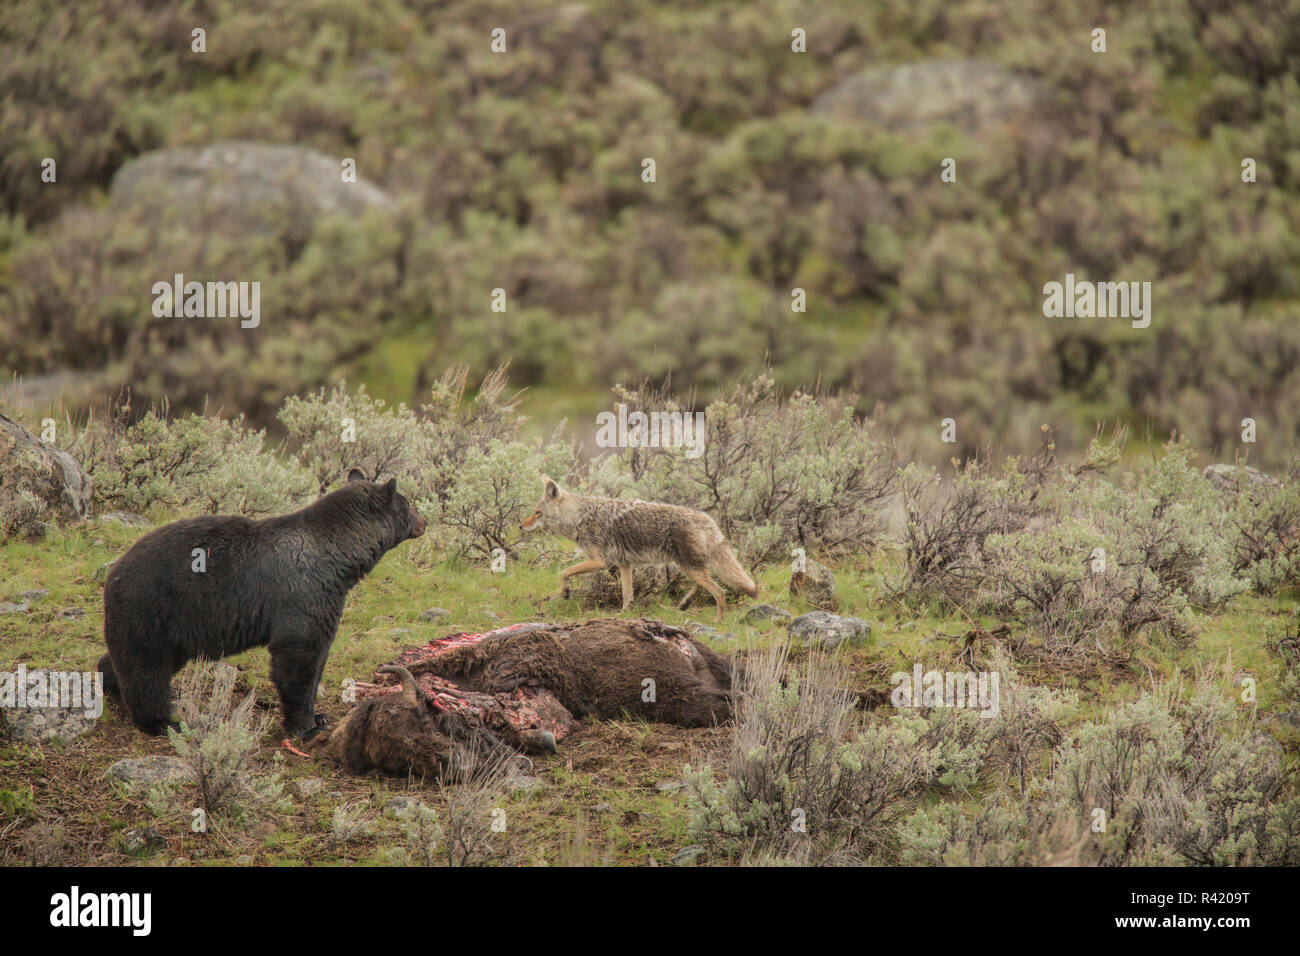 USA, Wyoming, Yellowstone National Park. Coyote and black bear vie for bison carcass. Stock Photo